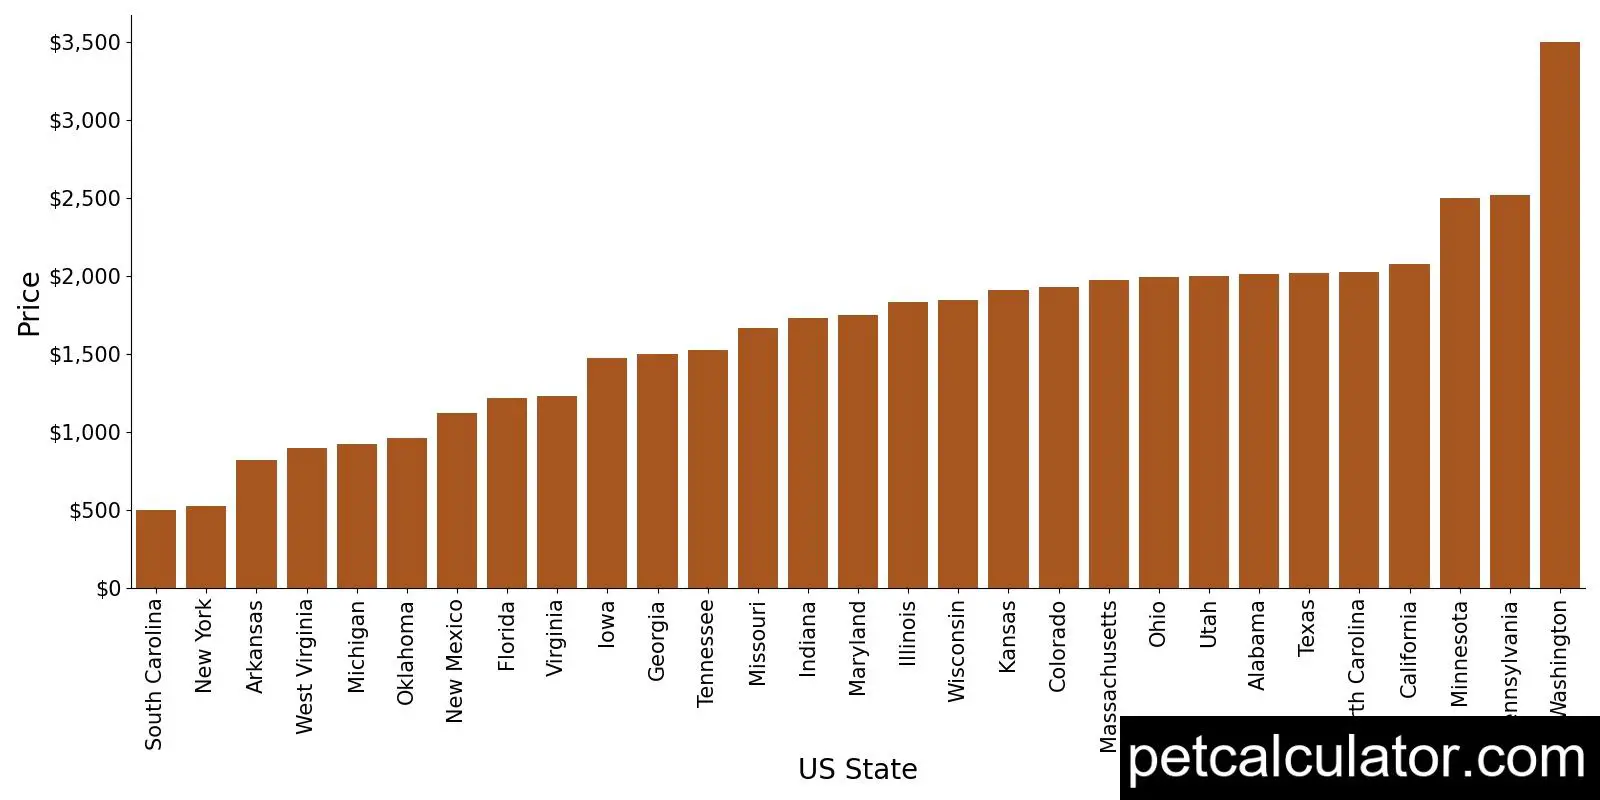 Price of Mastiff by US State 